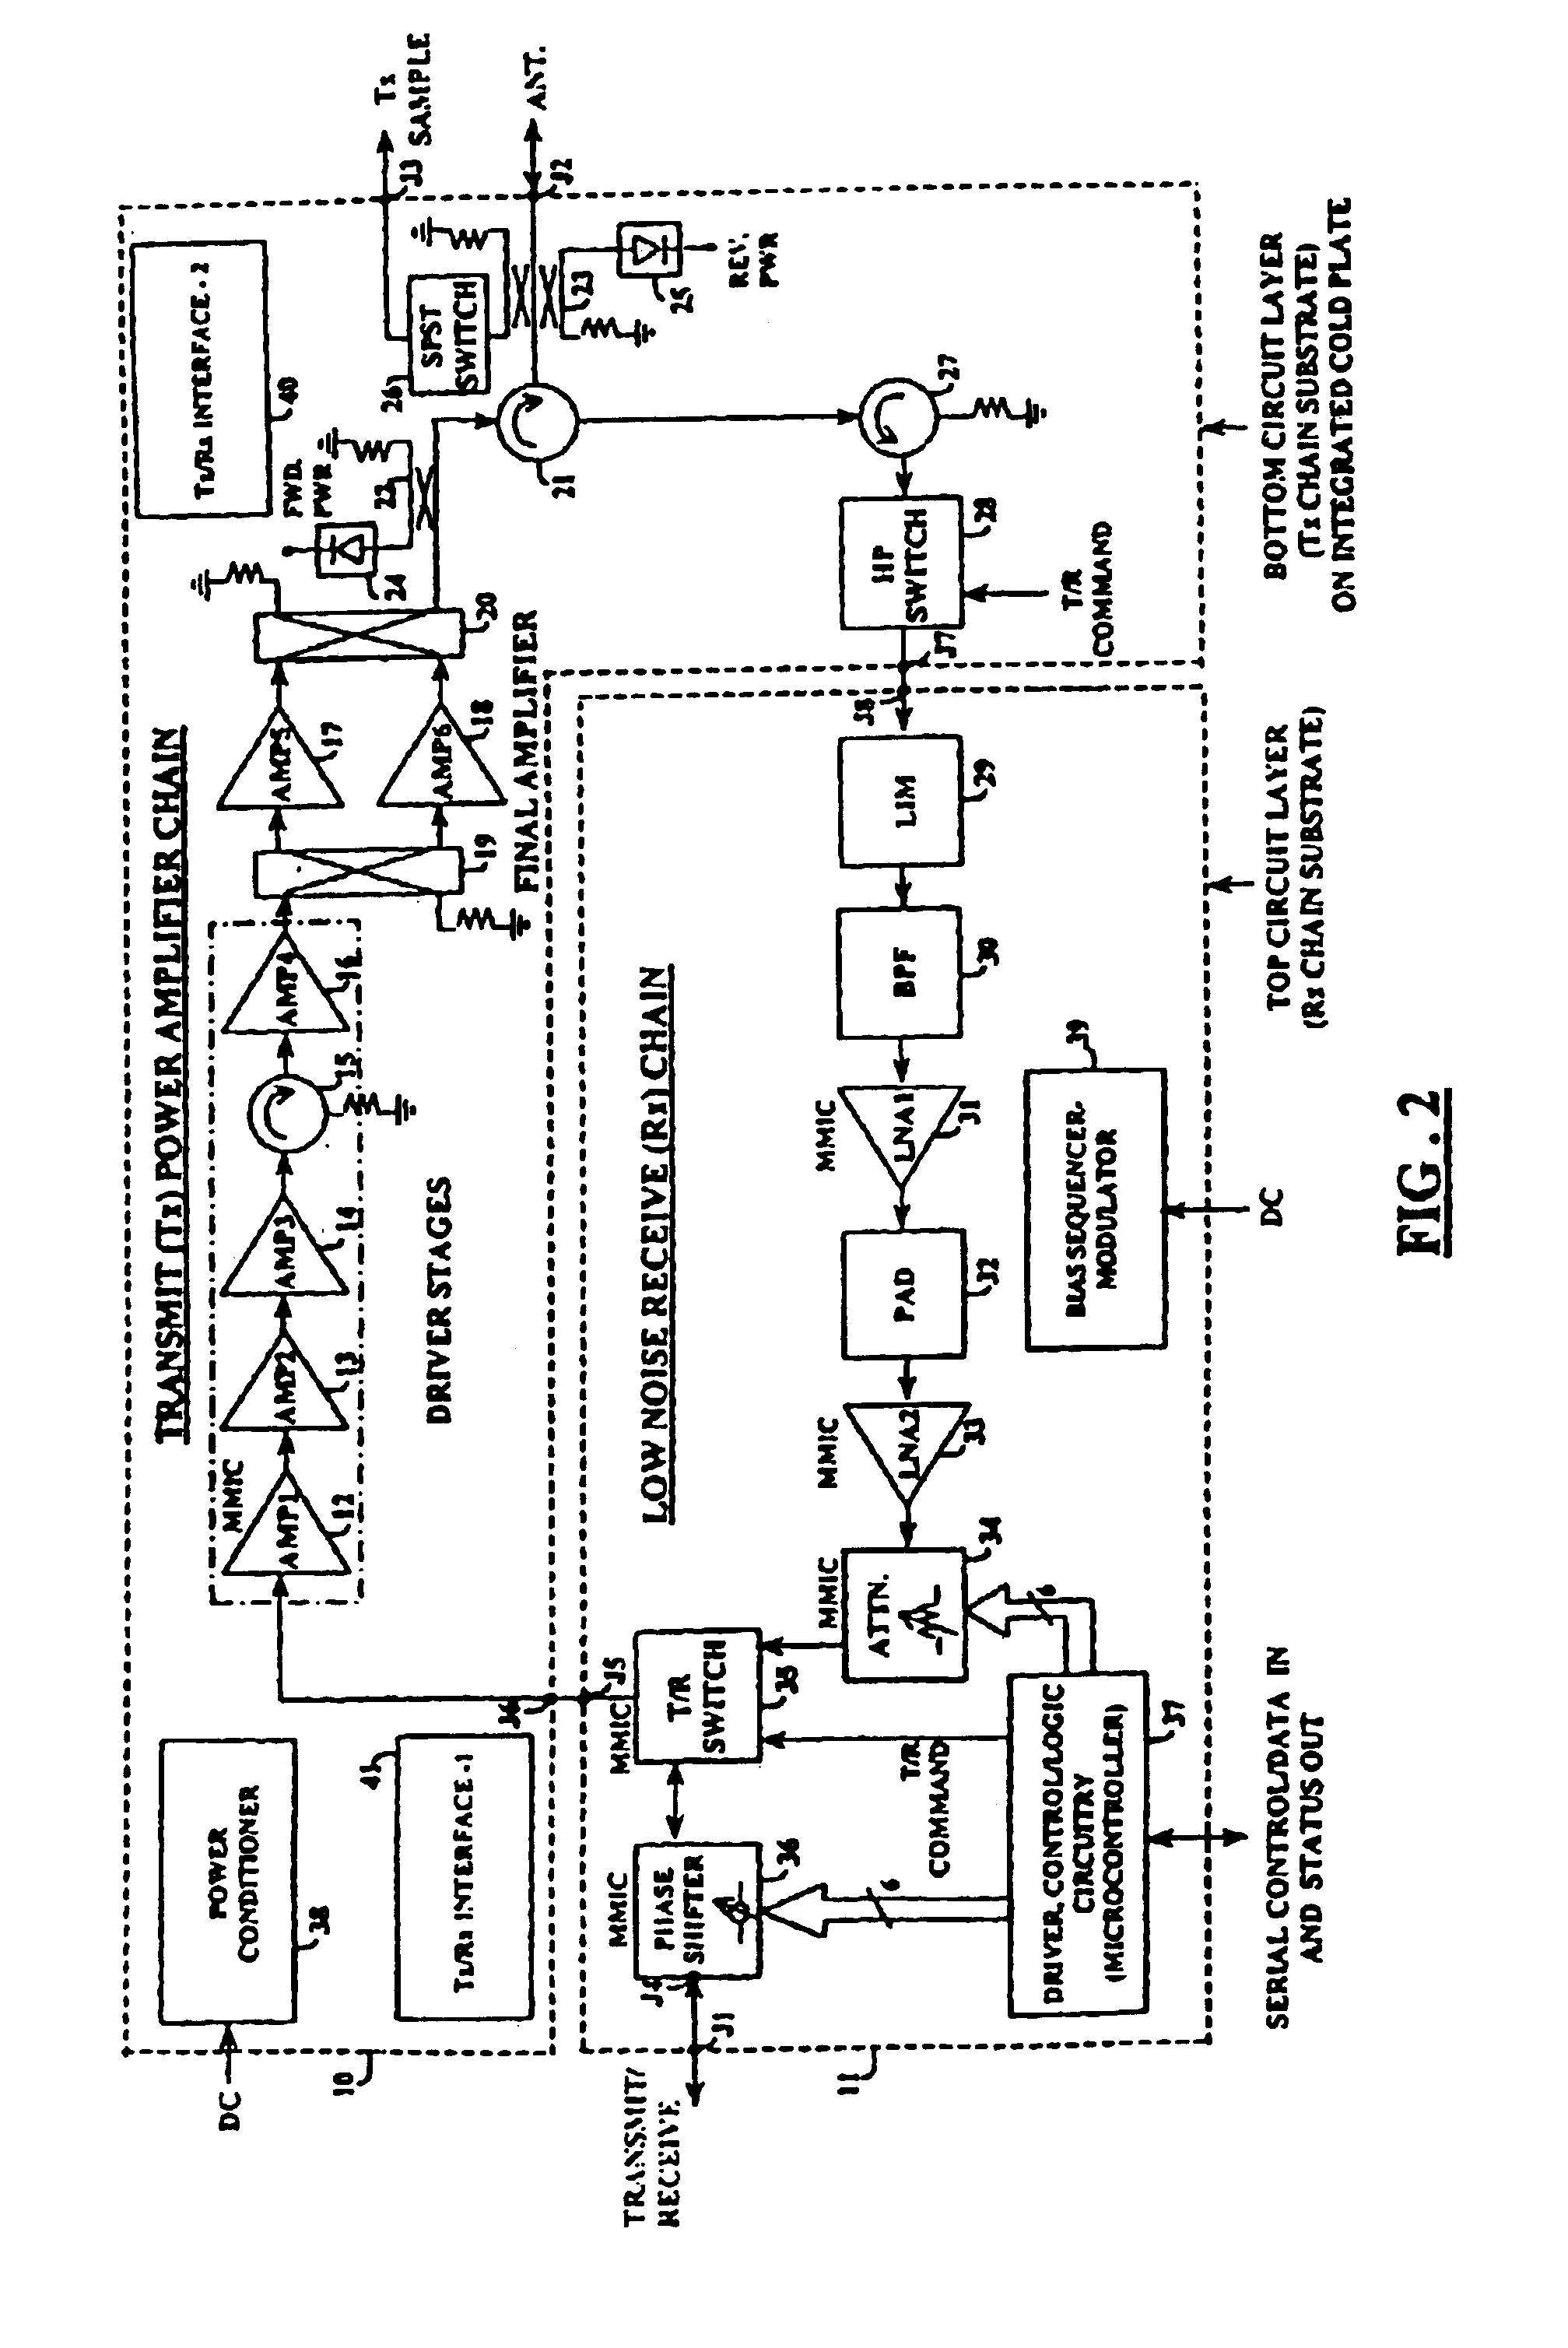 Transmit/receiver module for active phased array antenna